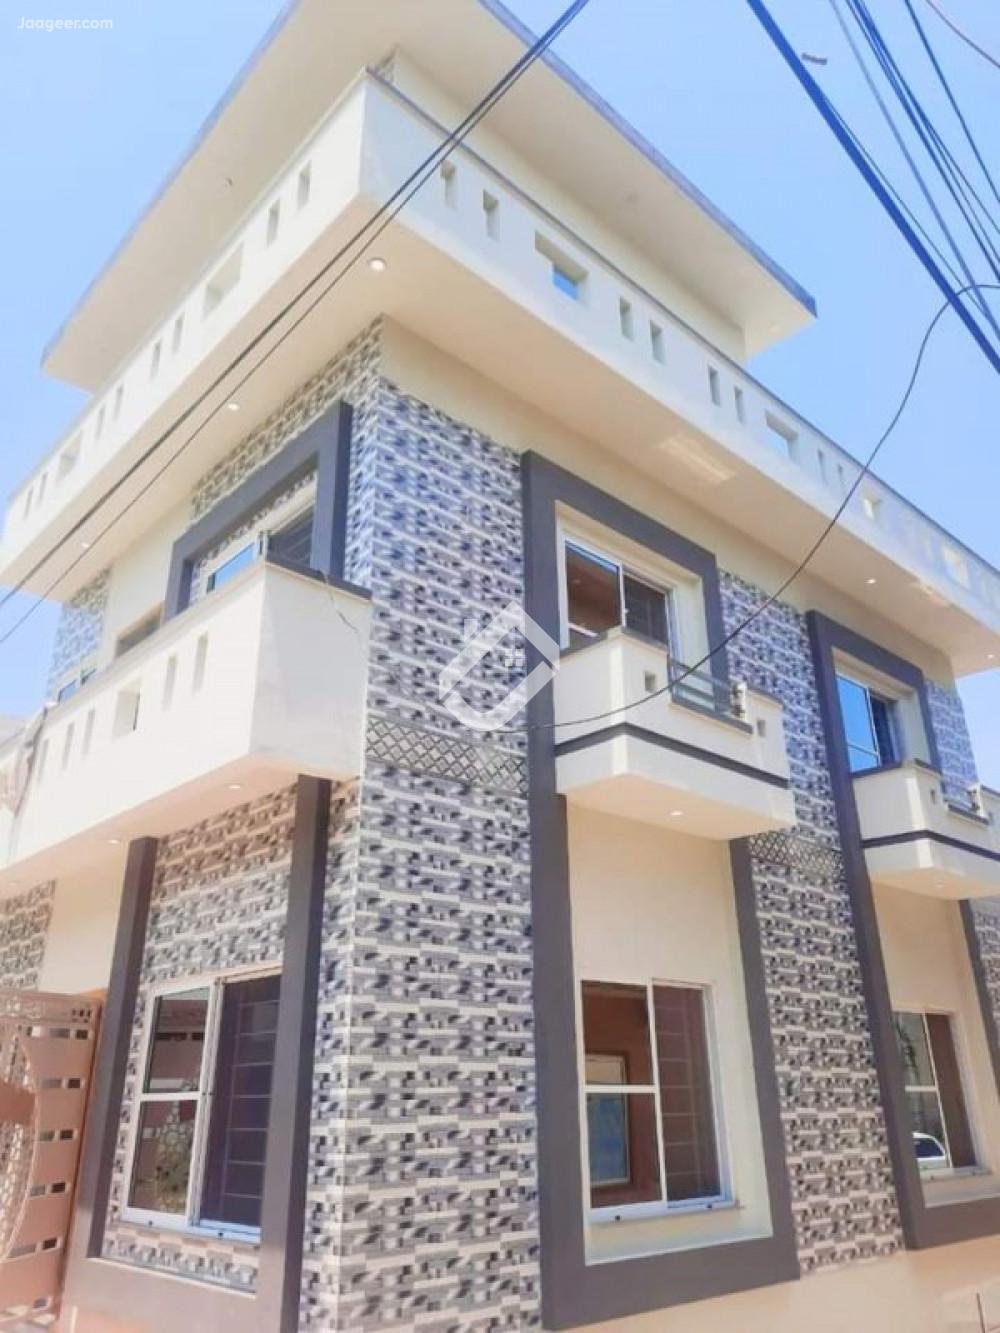 View  2.5 Marla Triple Storey Basement Commercial House For Rent In Pakistan Town Street 25 in Pakistan Town, Islamabad